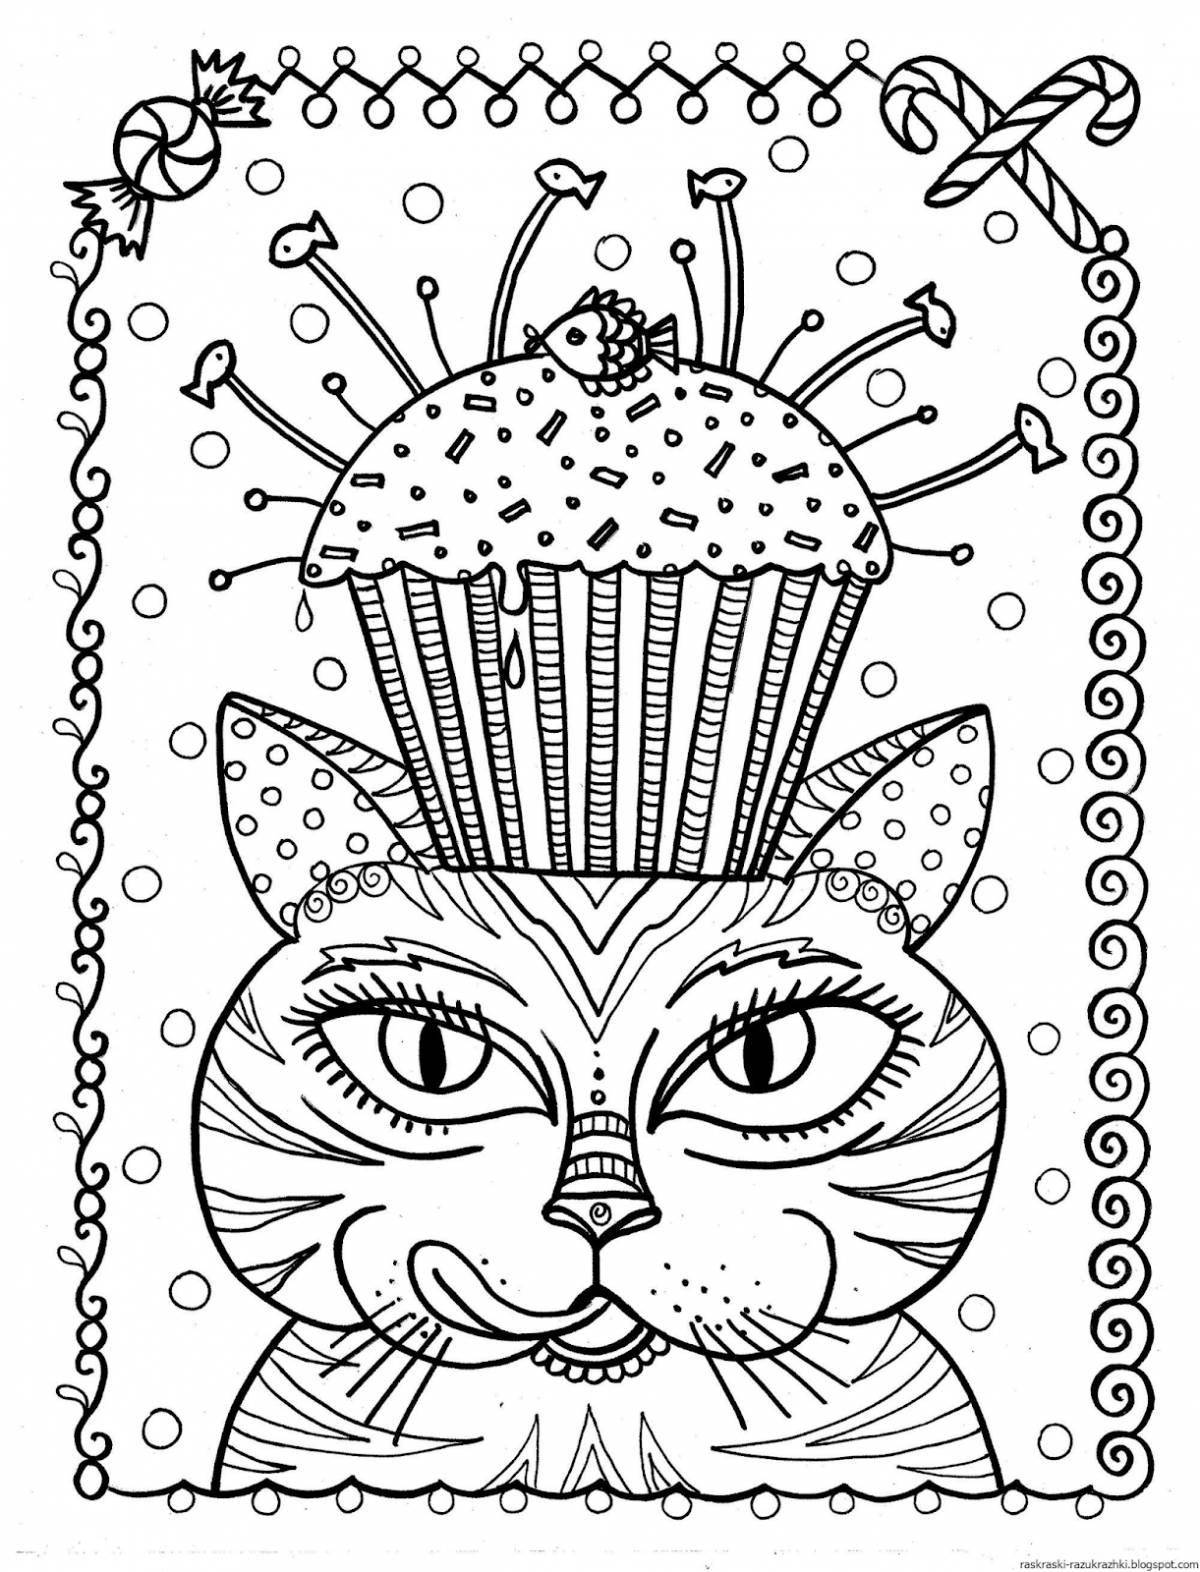 Luminous coloring pages 9 years old for cat girls